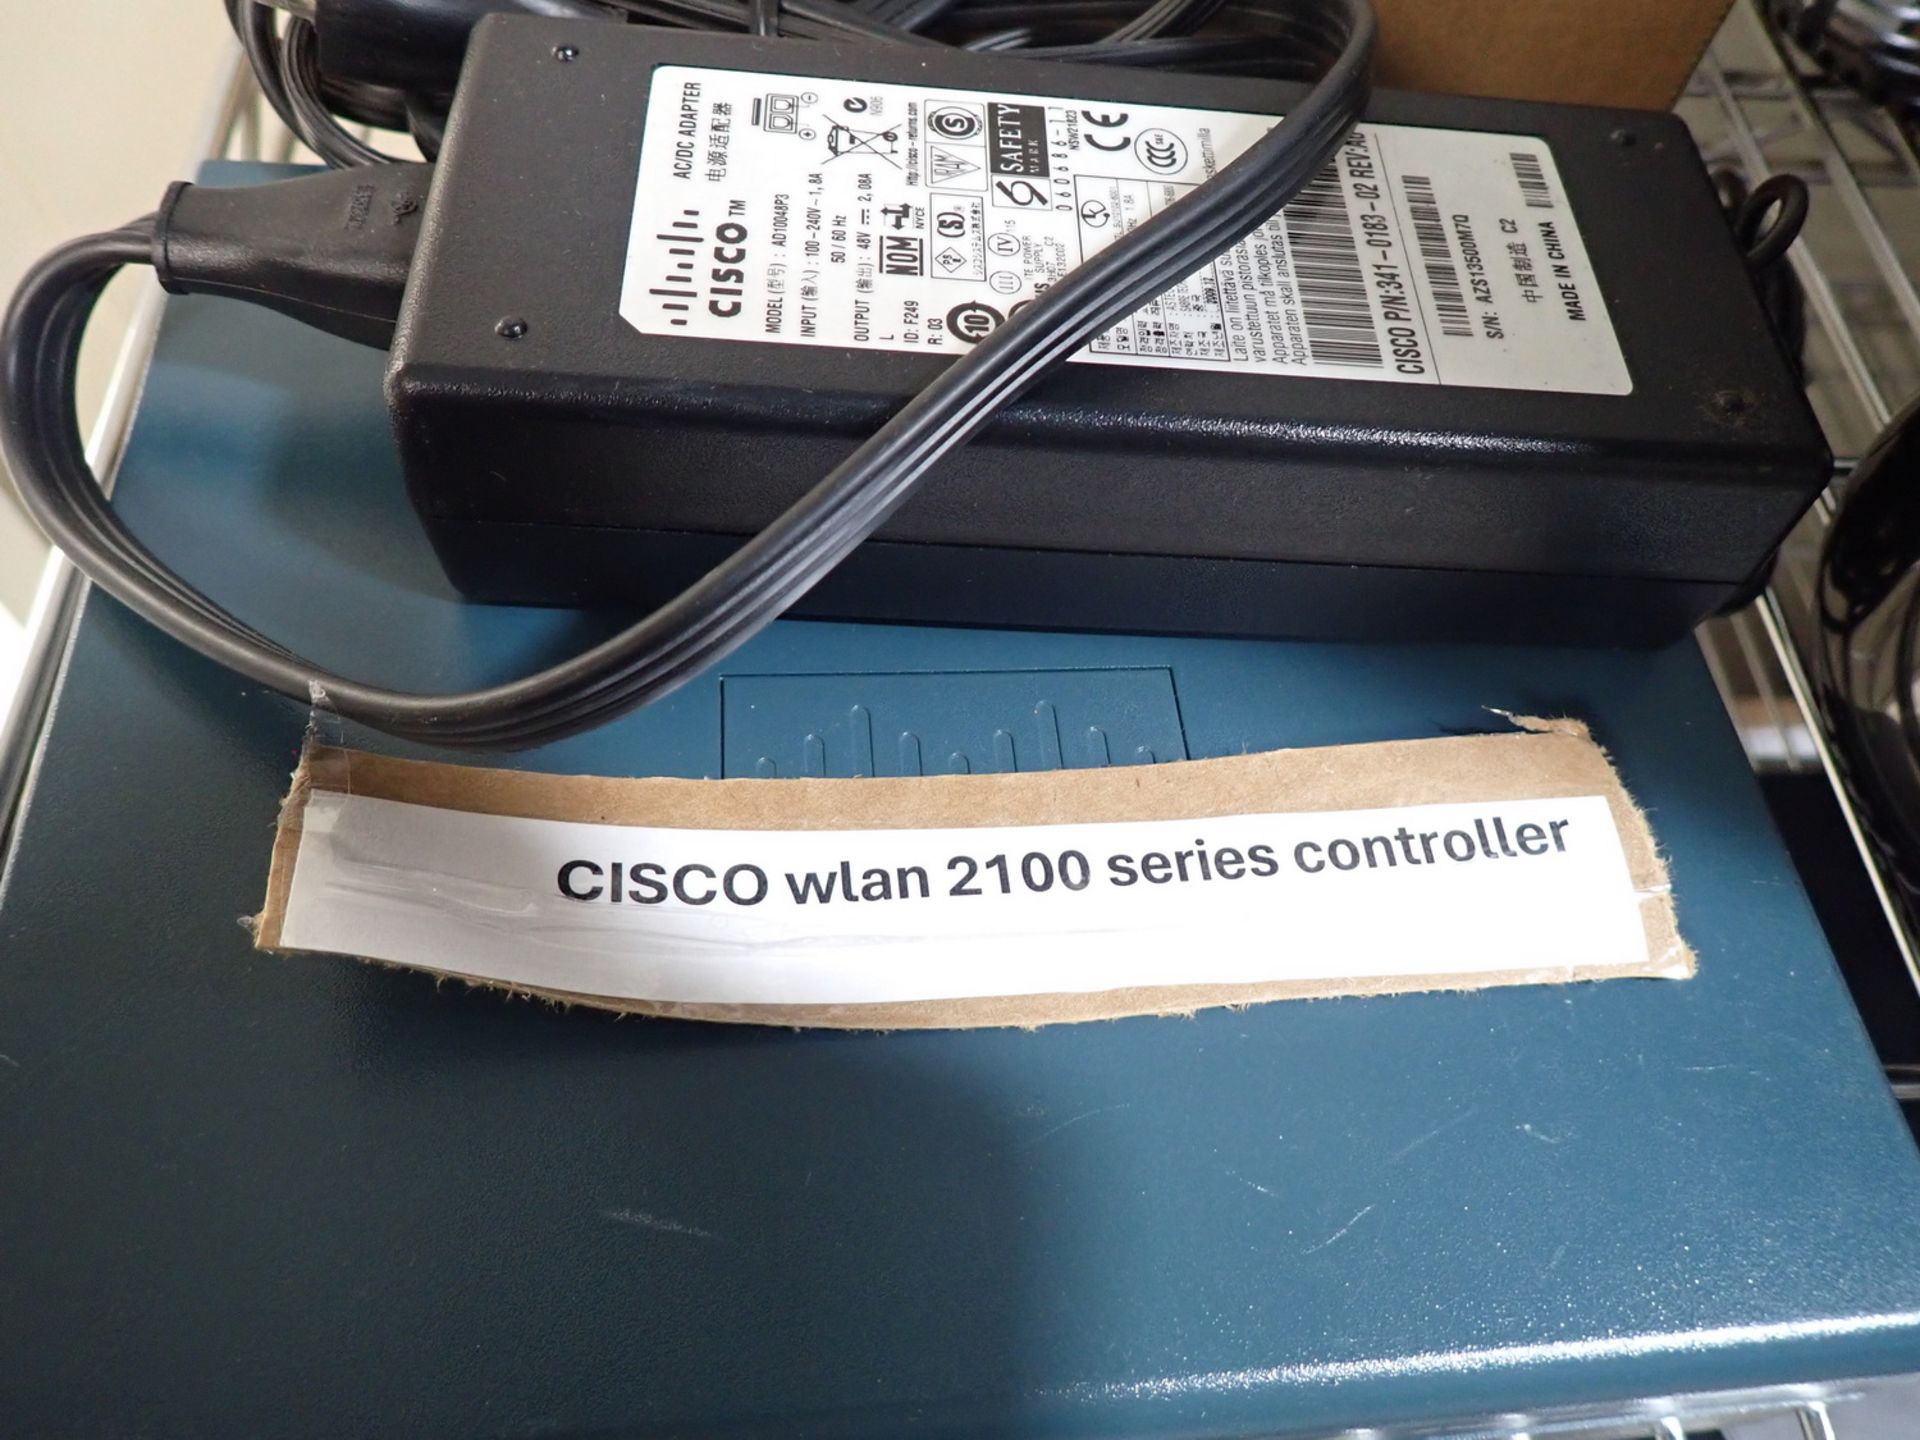 LOT - CISCO 2100 SERIES CONTROLLER,ALGO PAGING ADAPTER, & ONE TOUCH HUB - Image 4 of 4